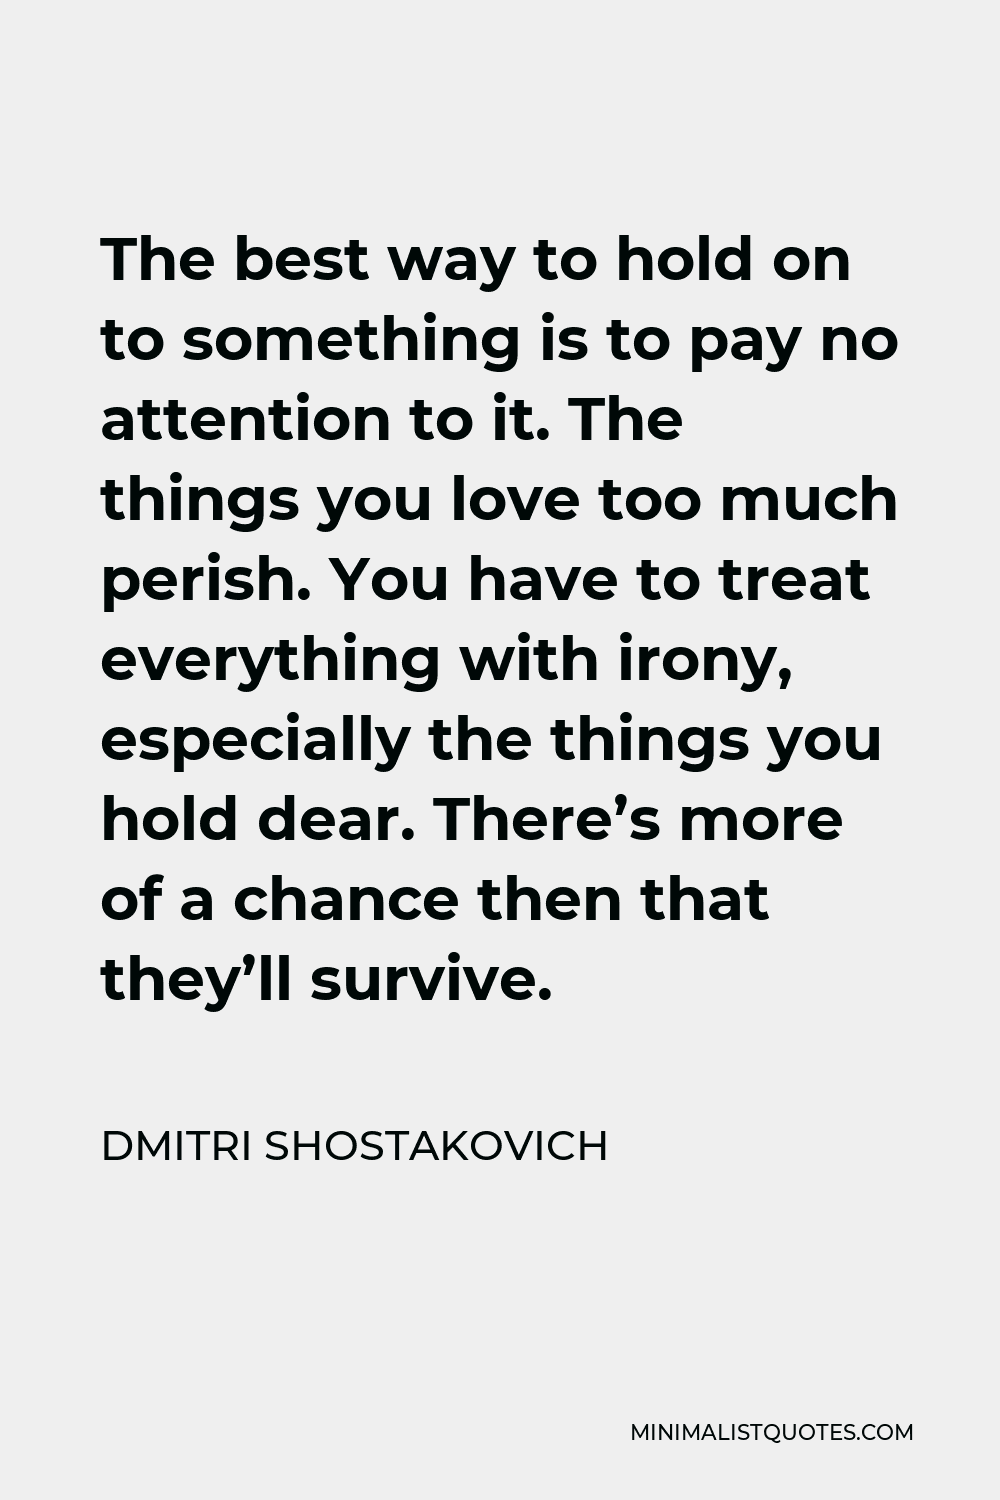 Dmitri Shostakovich Quote - The best way to hold on to something is to pay no attention to it. The things you love too much perish. You have to treat everything with irony, especially the things you hold dear. There’s more of a chance then that they’ll survive.